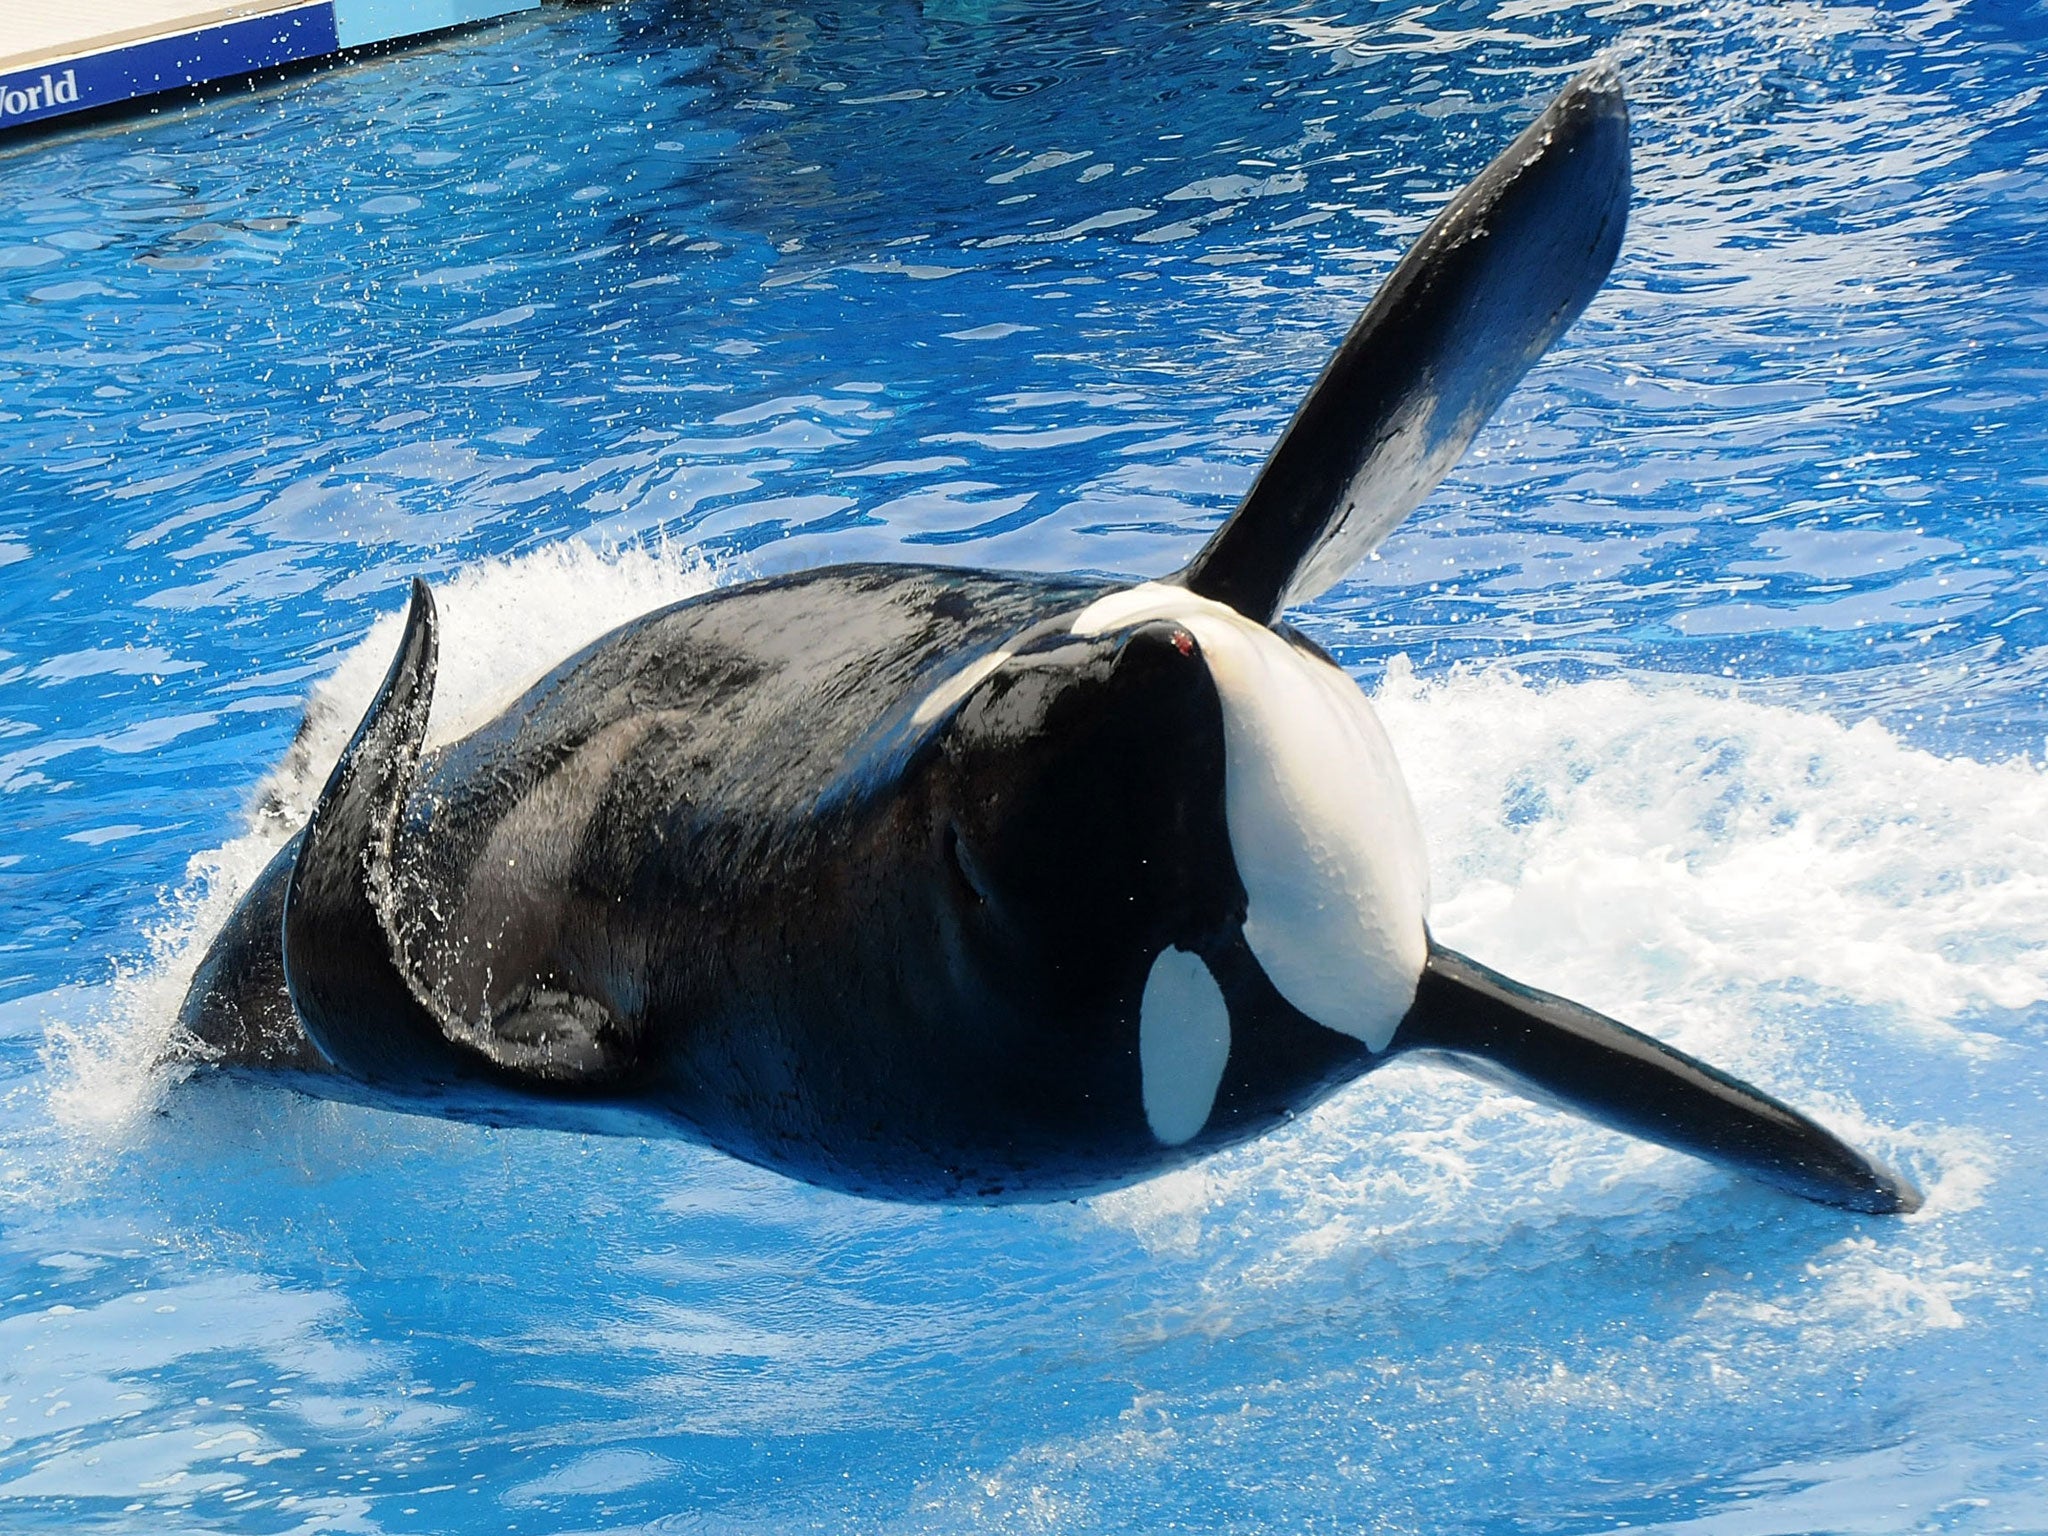 Killer whale 'Tilikum' appears during a performance in his show 'Believe' at Sea World in Orlando, Florida. Tilikum has been involved in the deaths of three people during his time in captivity since 1991